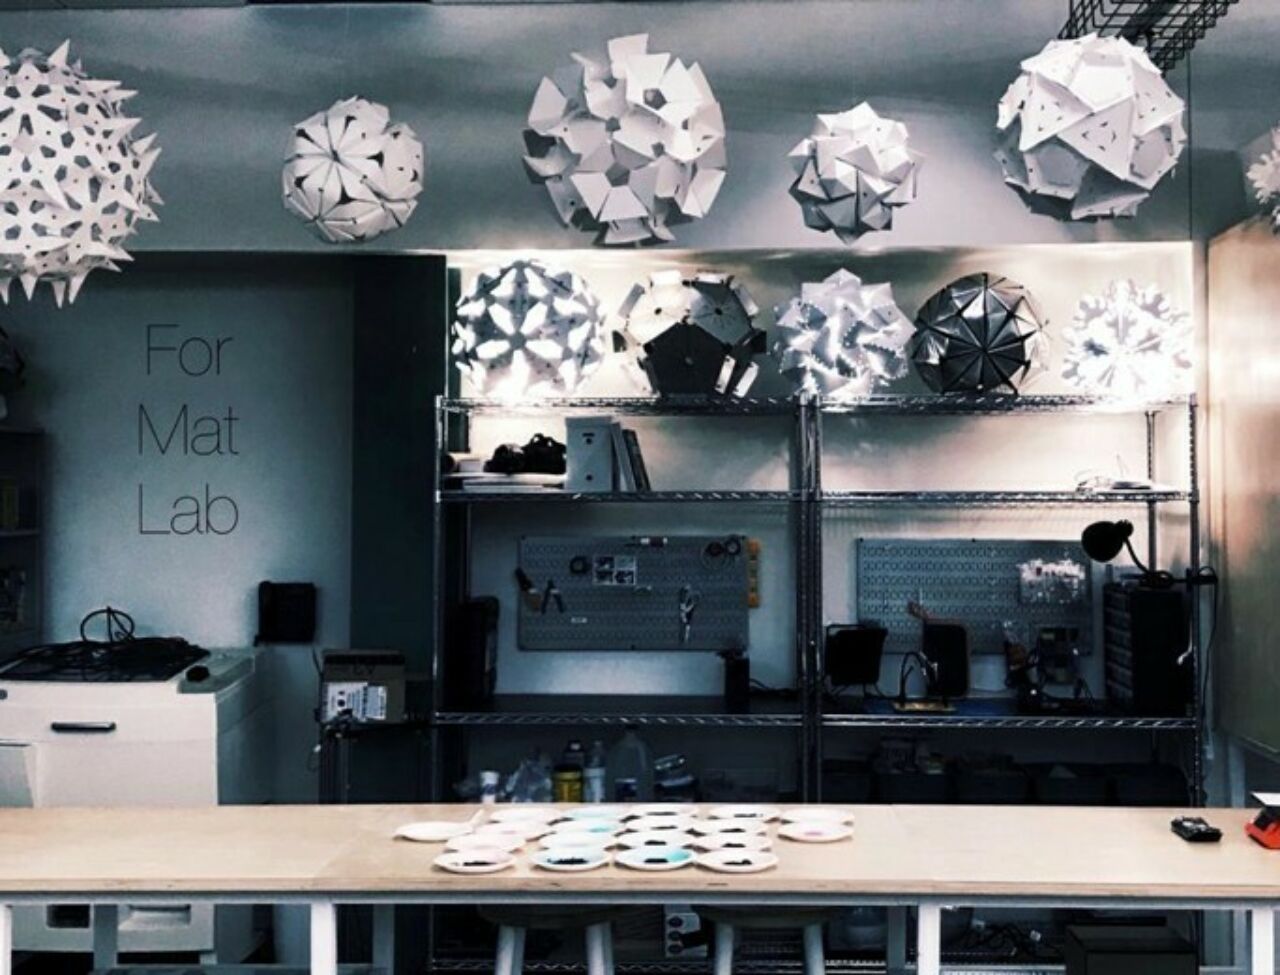 ForMatLab image showing several parametric paper lantern designs and other computational fabrications in a lab workspace